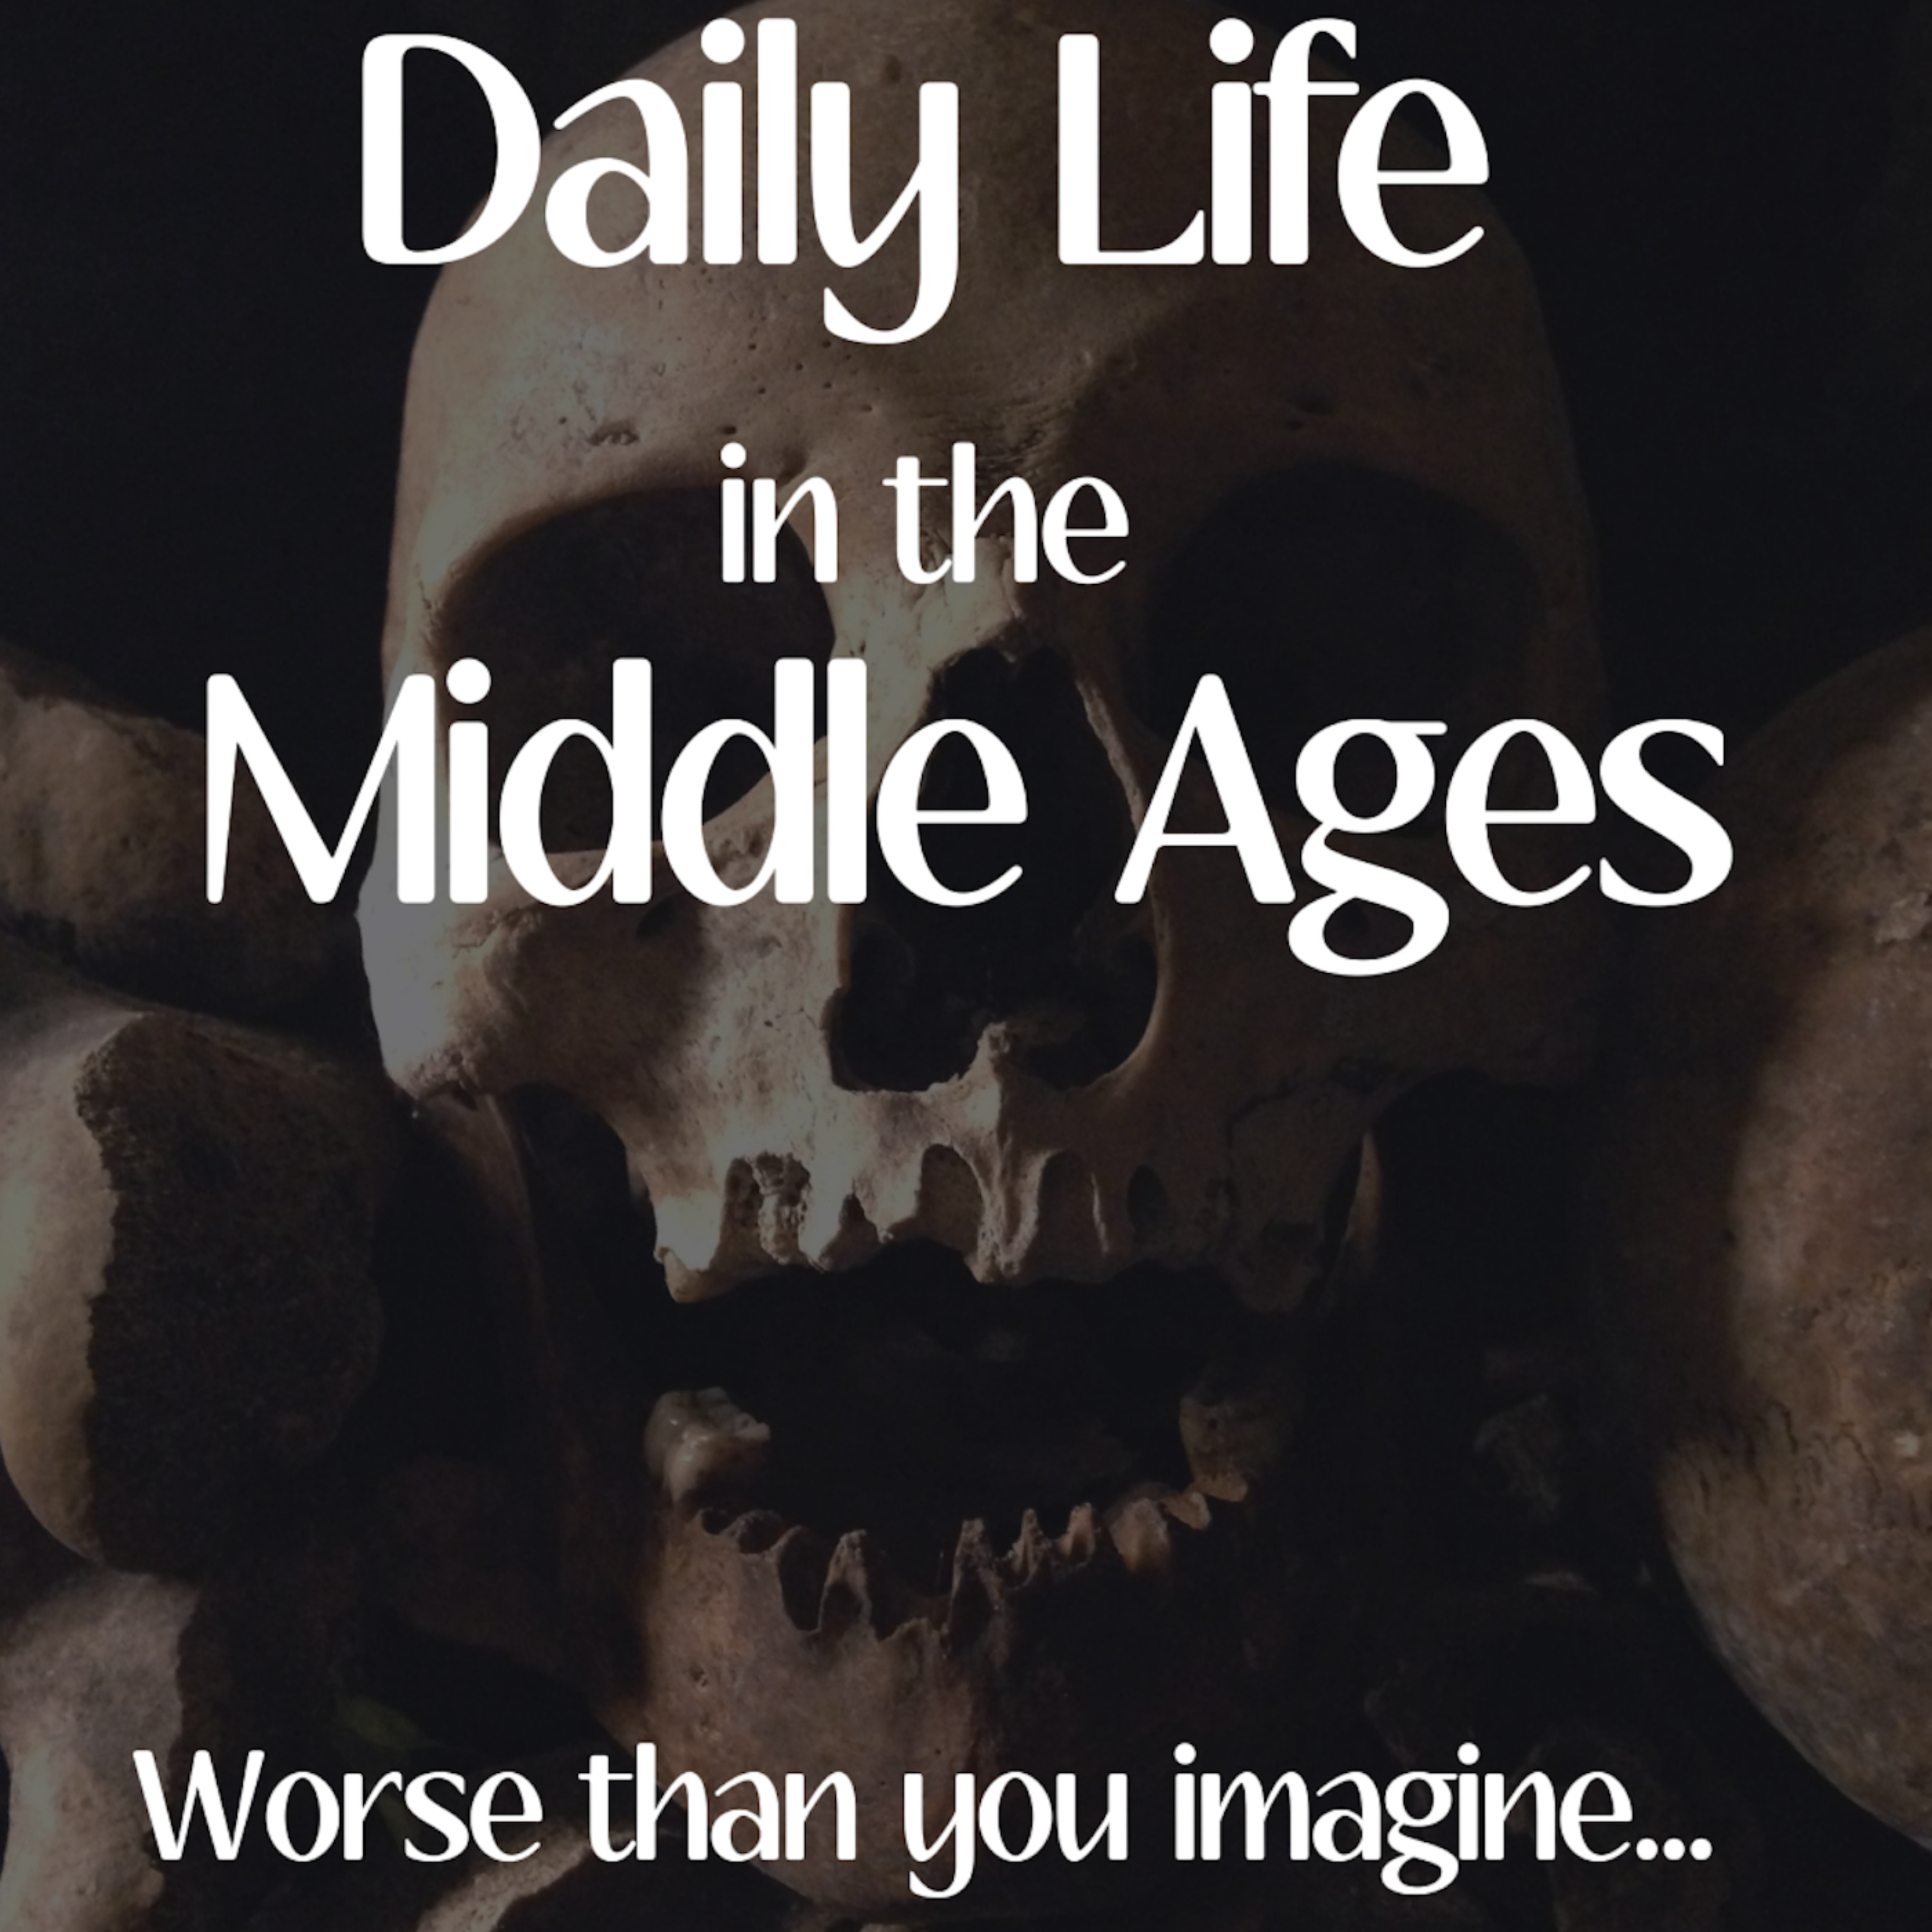 Daily Life in the Middle Ages. Worse than you imagine...